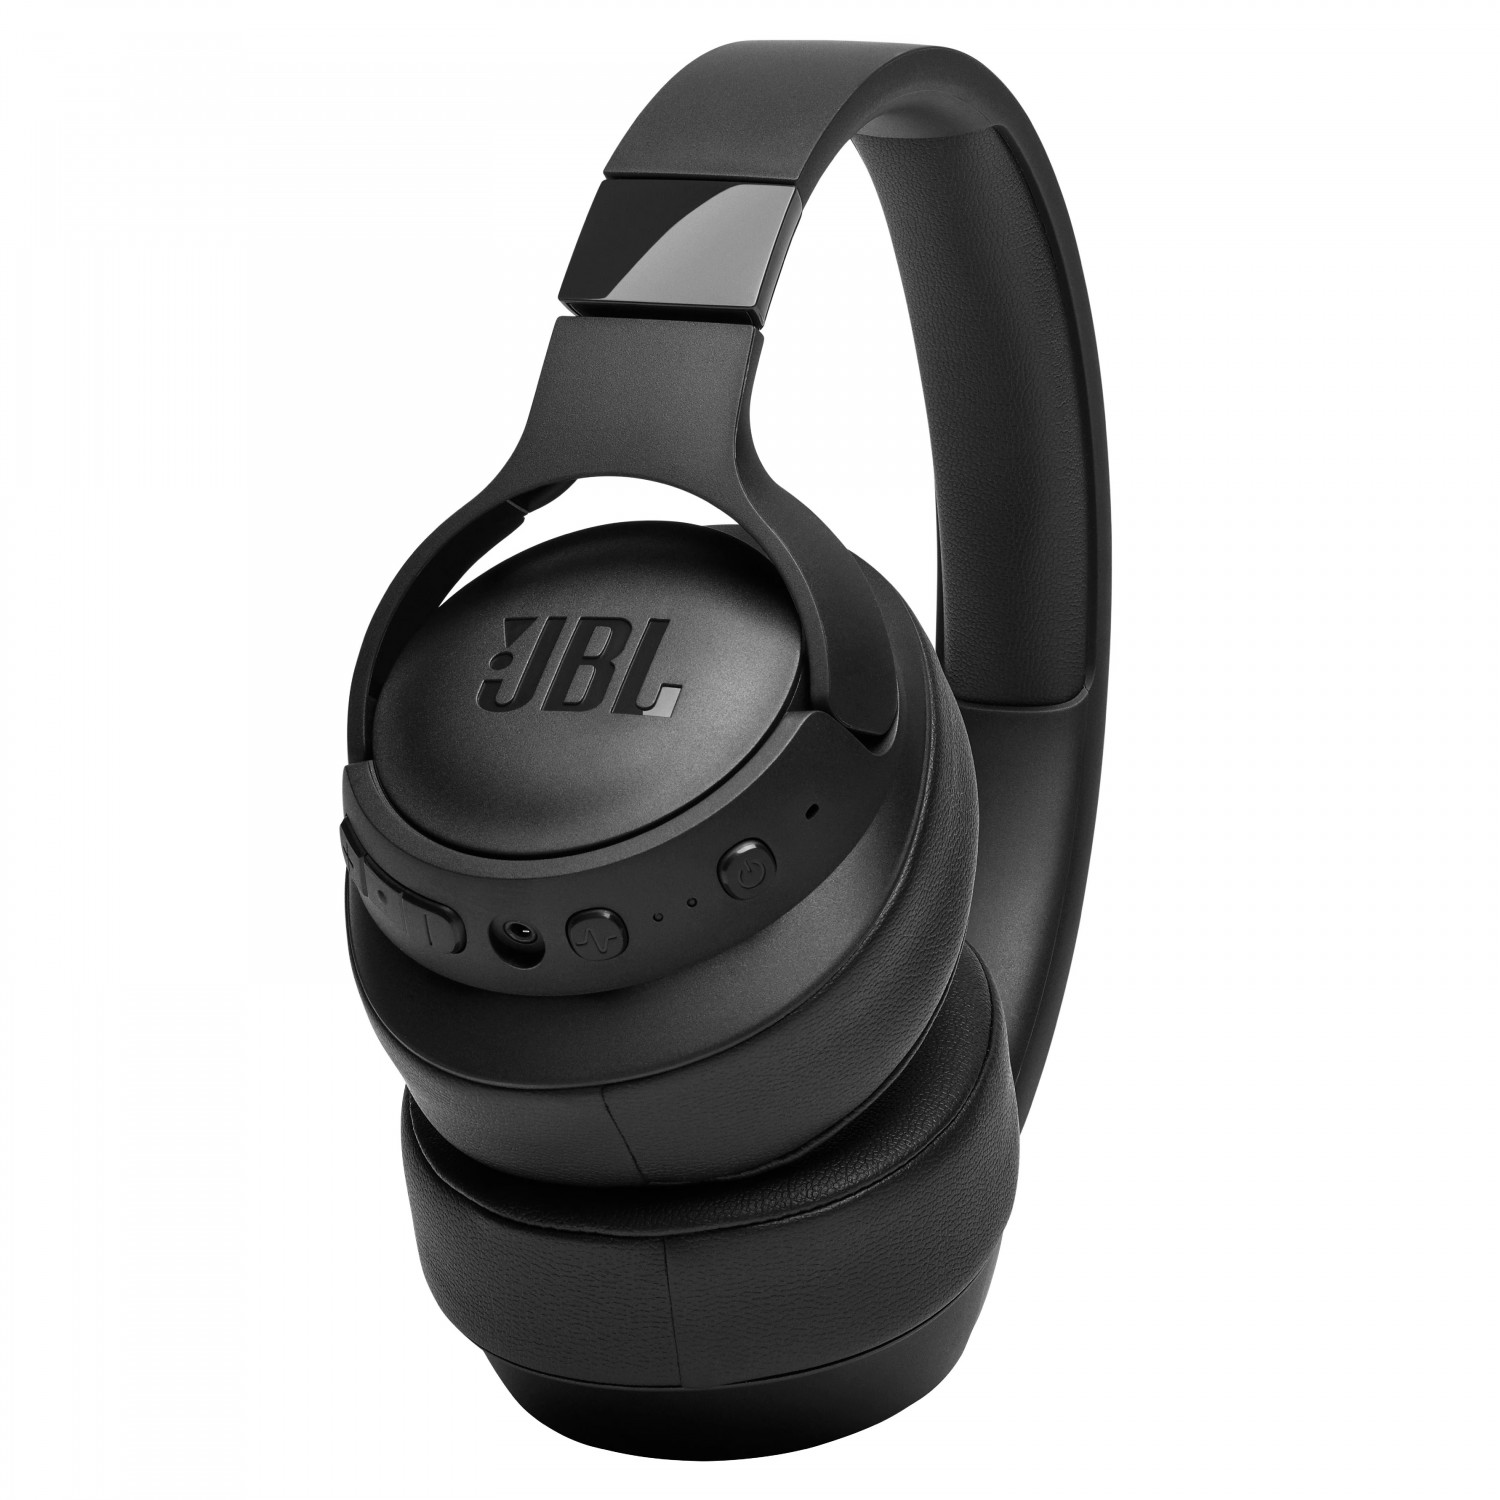 Why is no one talking about this? JBL Tune 710 BT Review. 